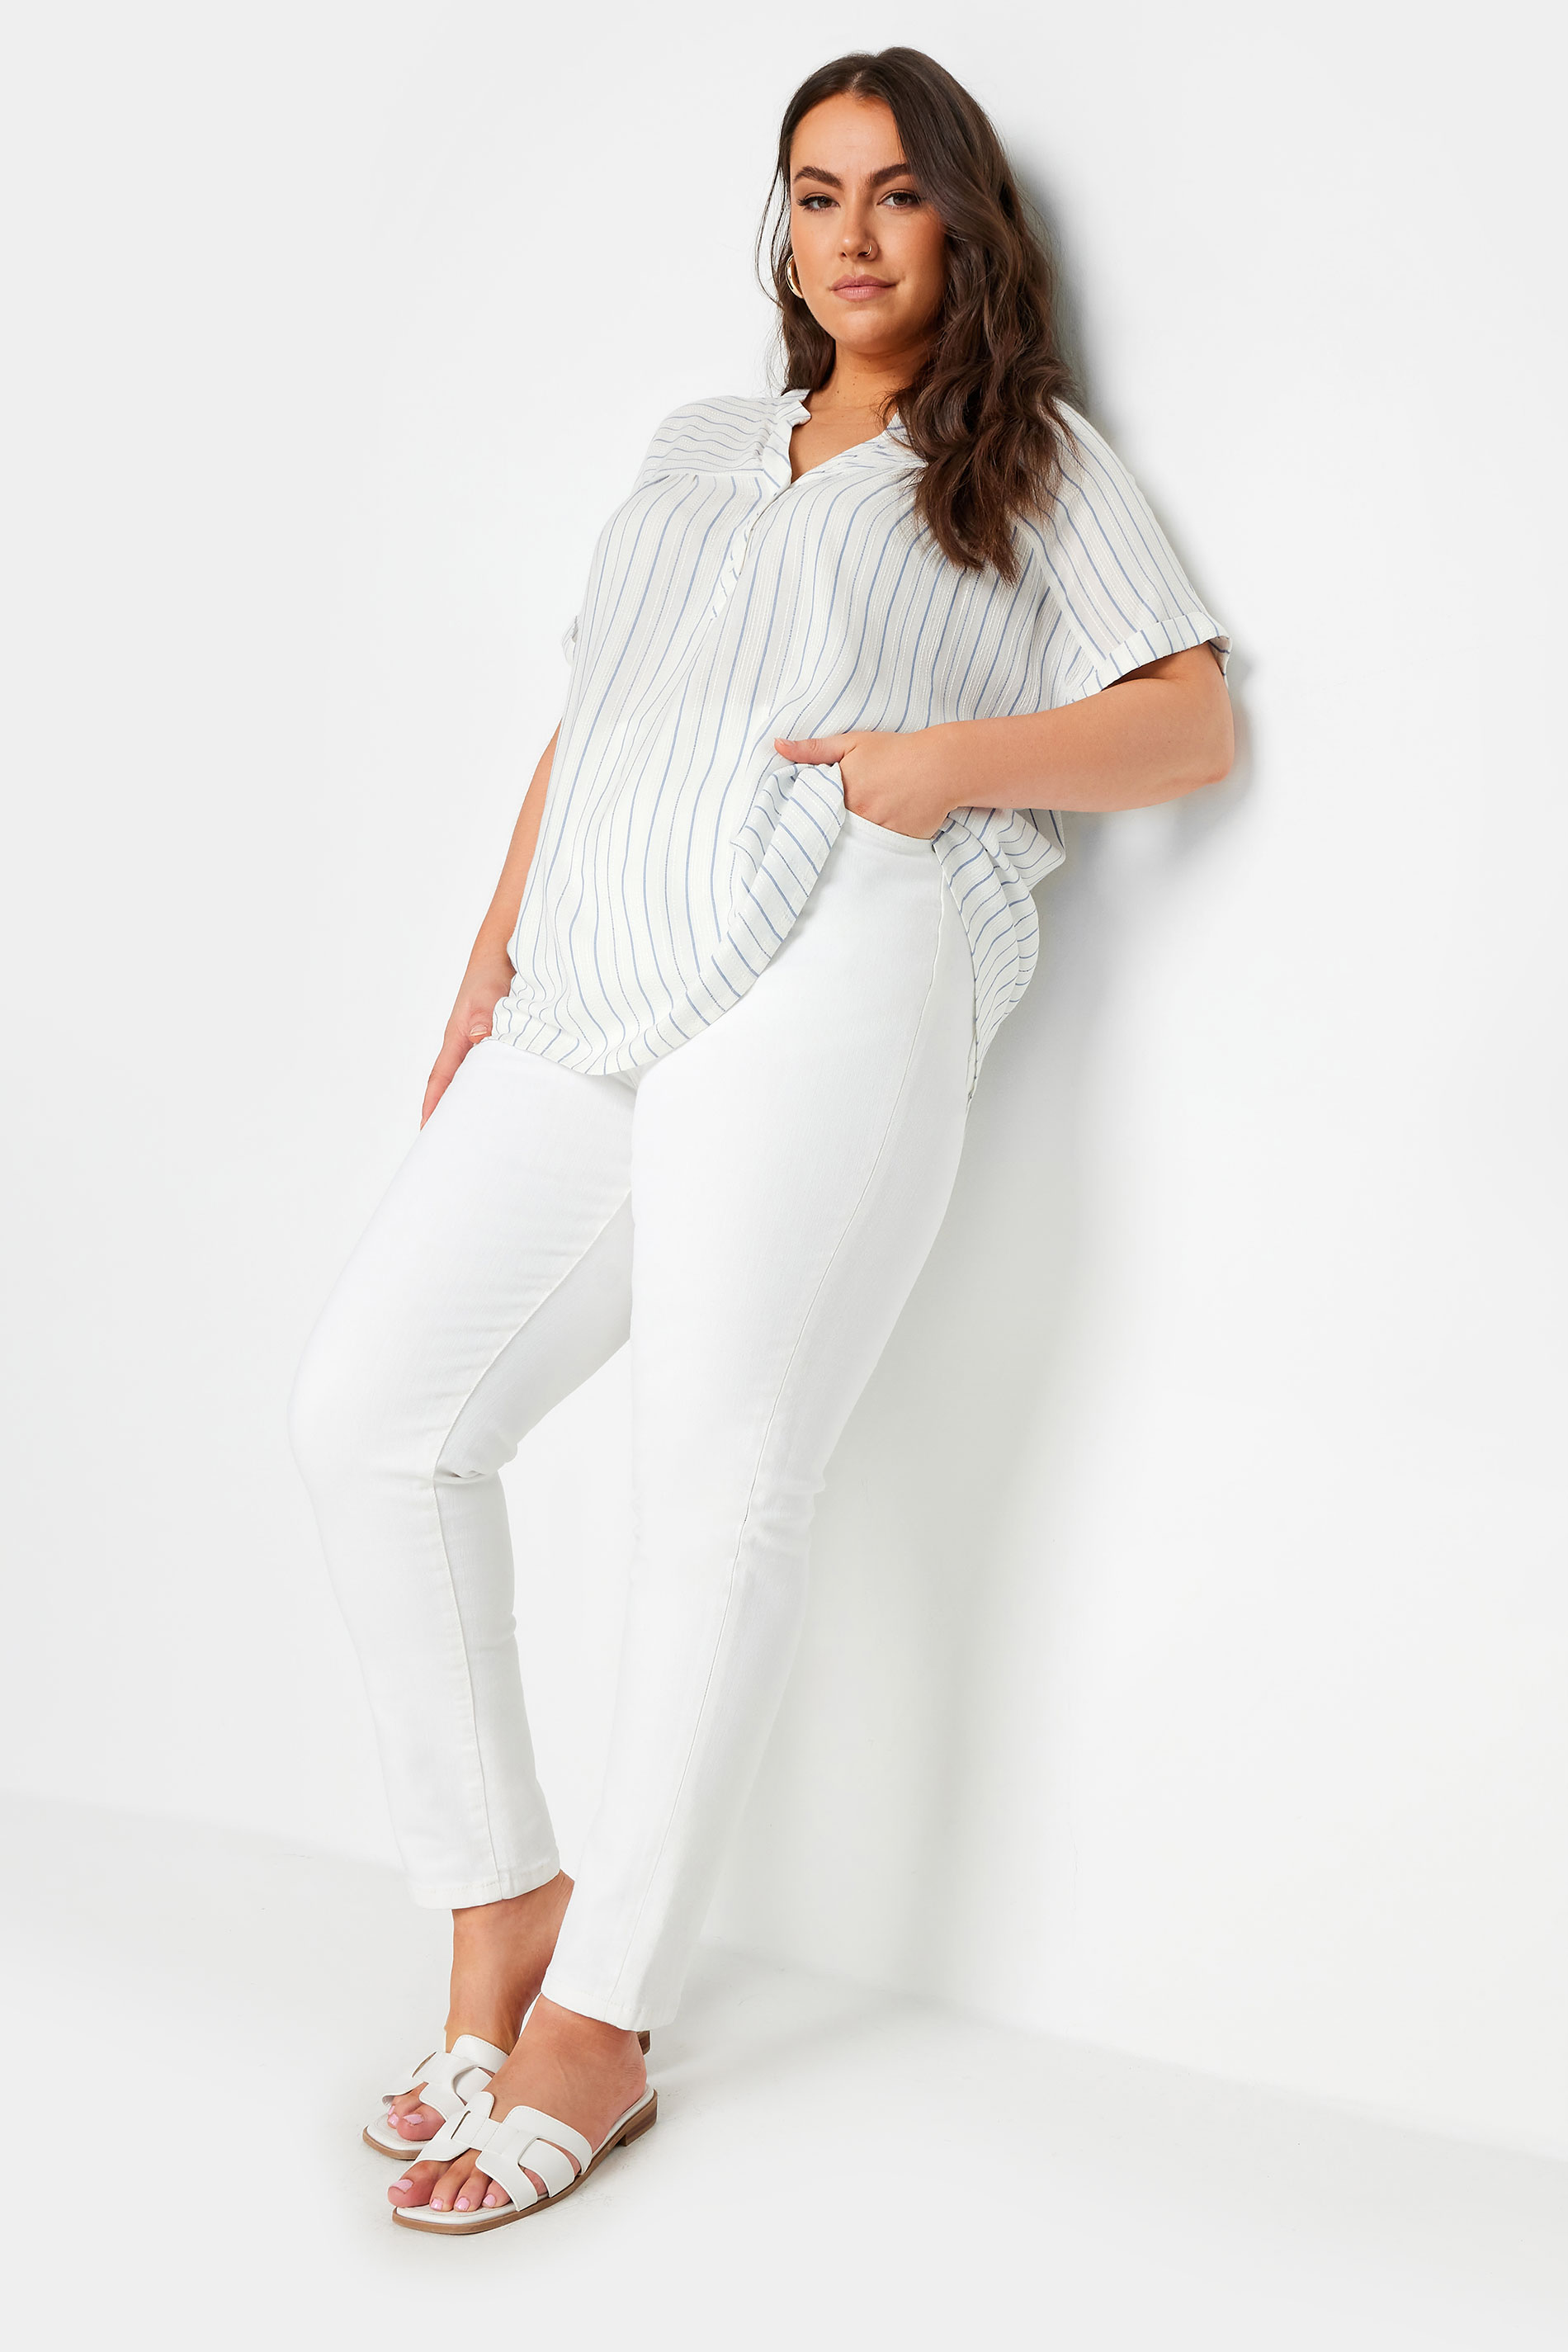 YOURS Plus Size White & Navy Blue Stripe Notch Neck Blouse | Yours Clothing 2